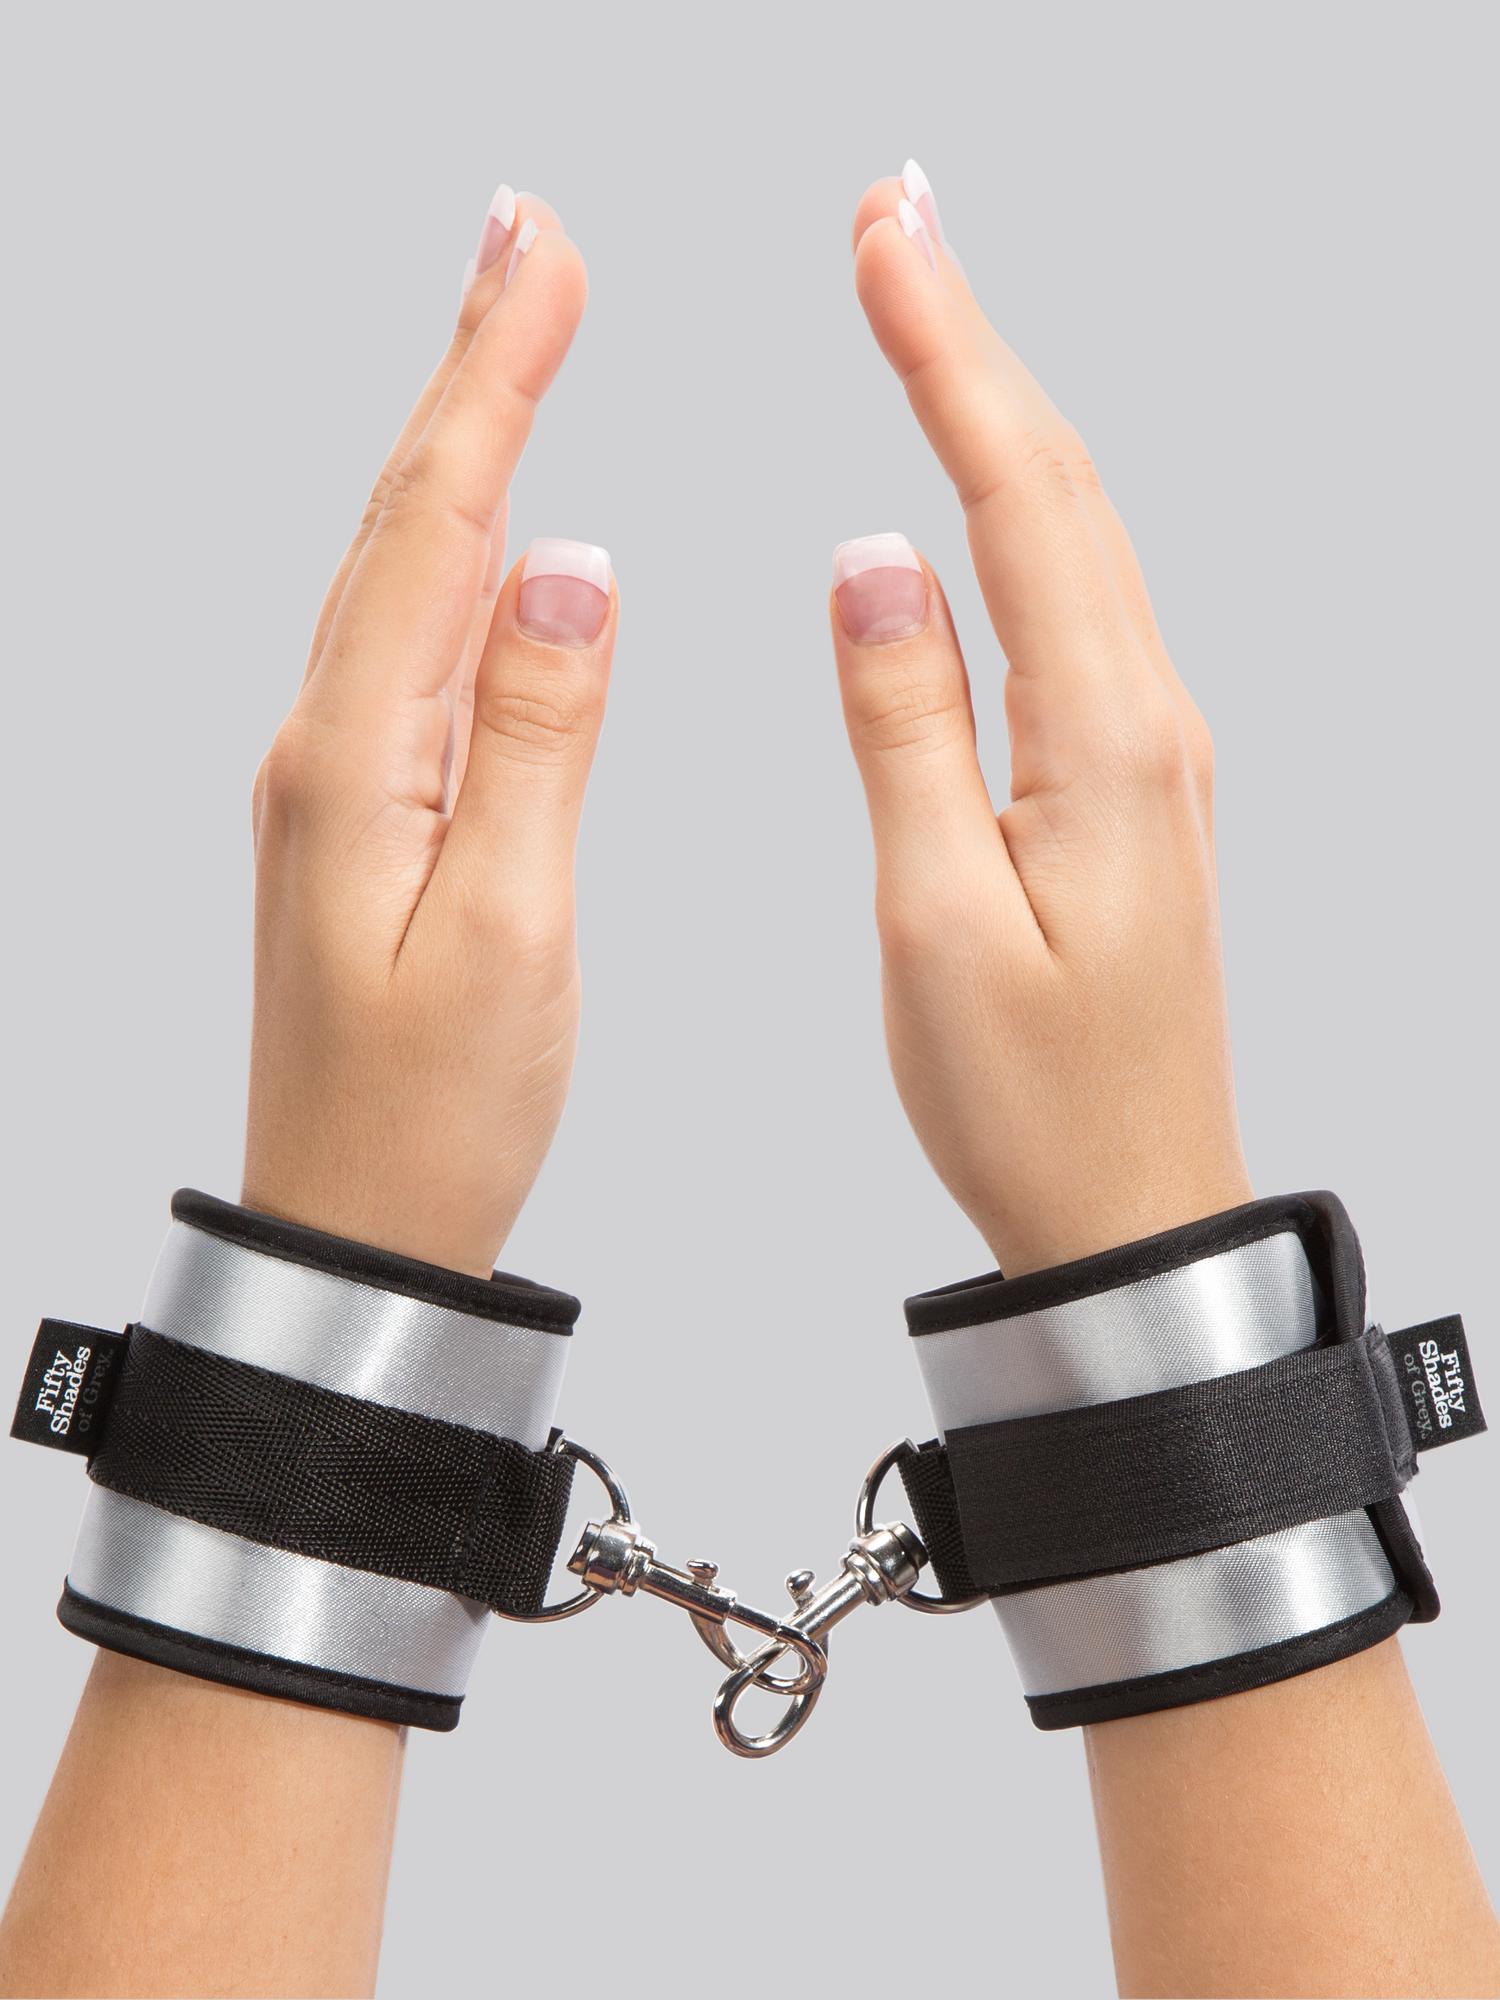 Fifty Shades of Grey Totally His Soft Handcuffs. Slide 2